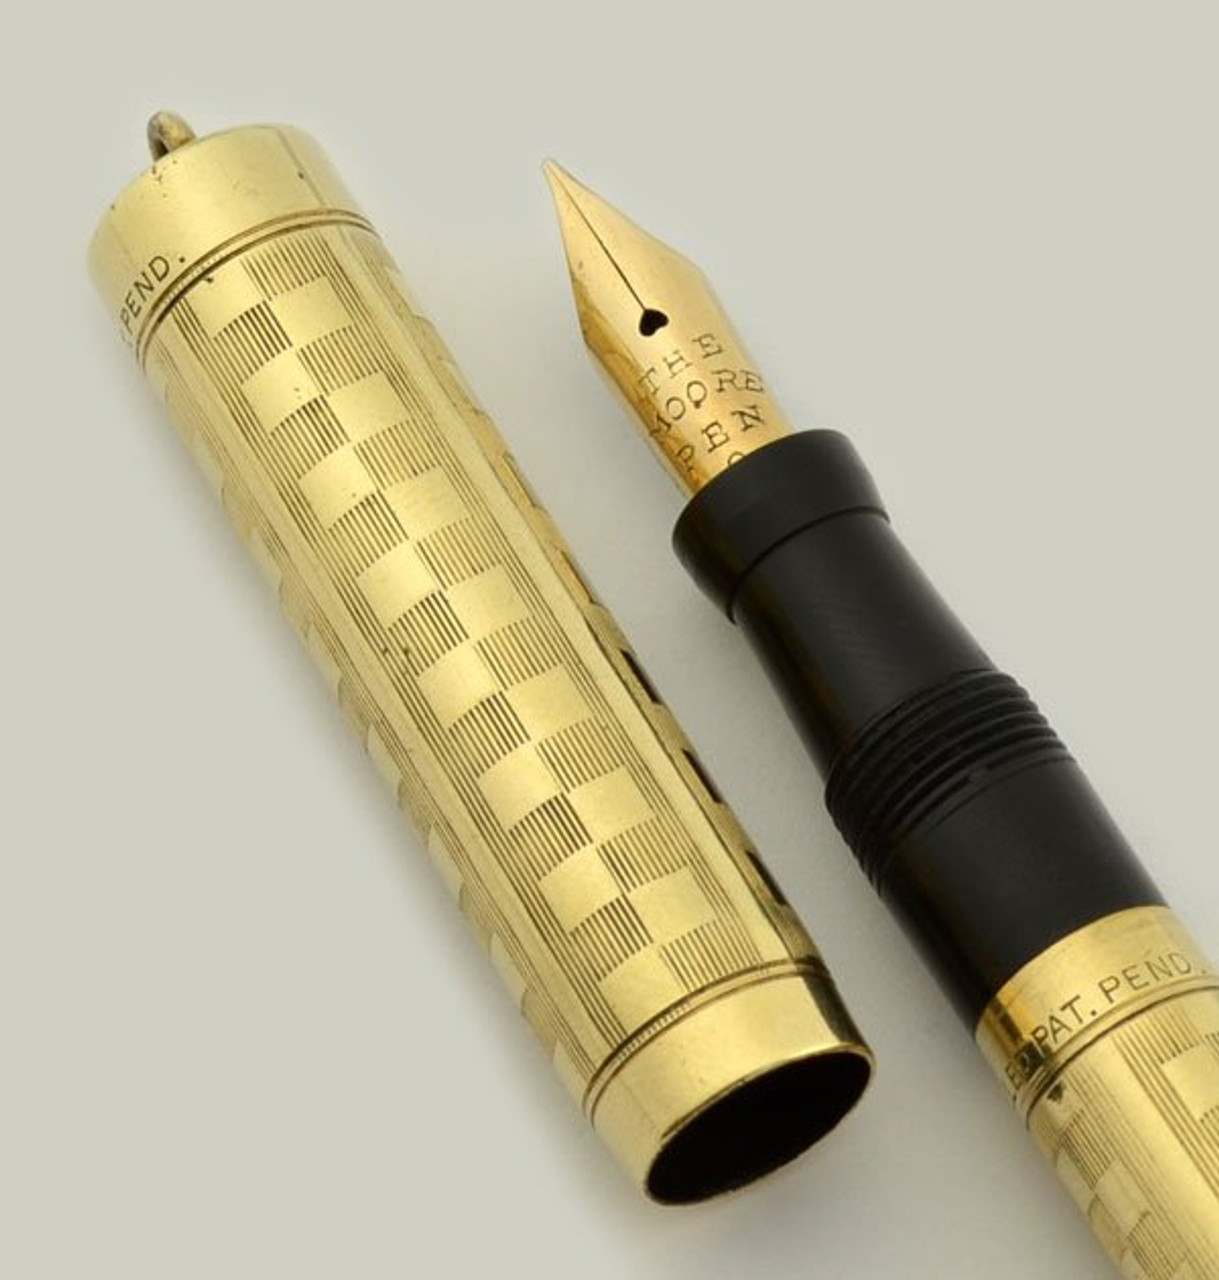 The Golden Ring Pen - Too Shiny For Ya